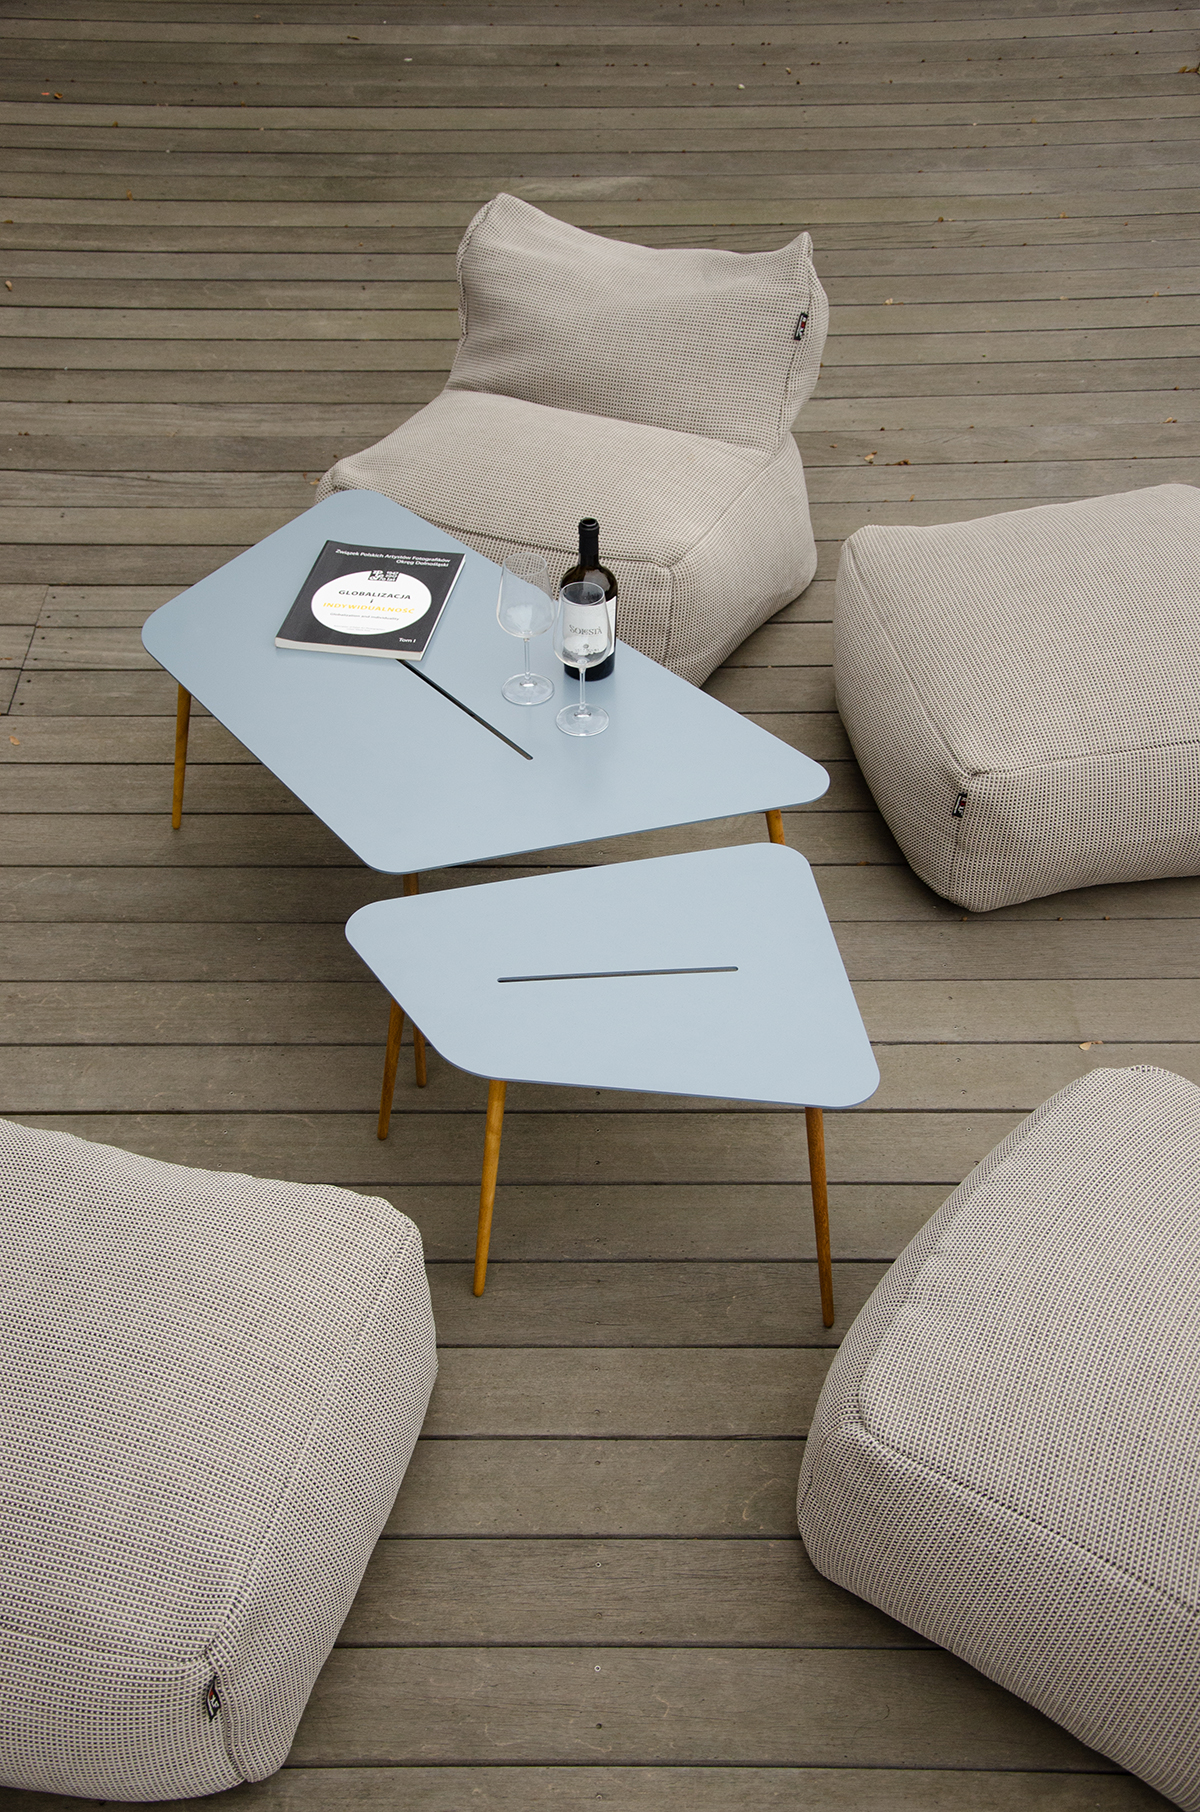 Run tables by Nooon.design